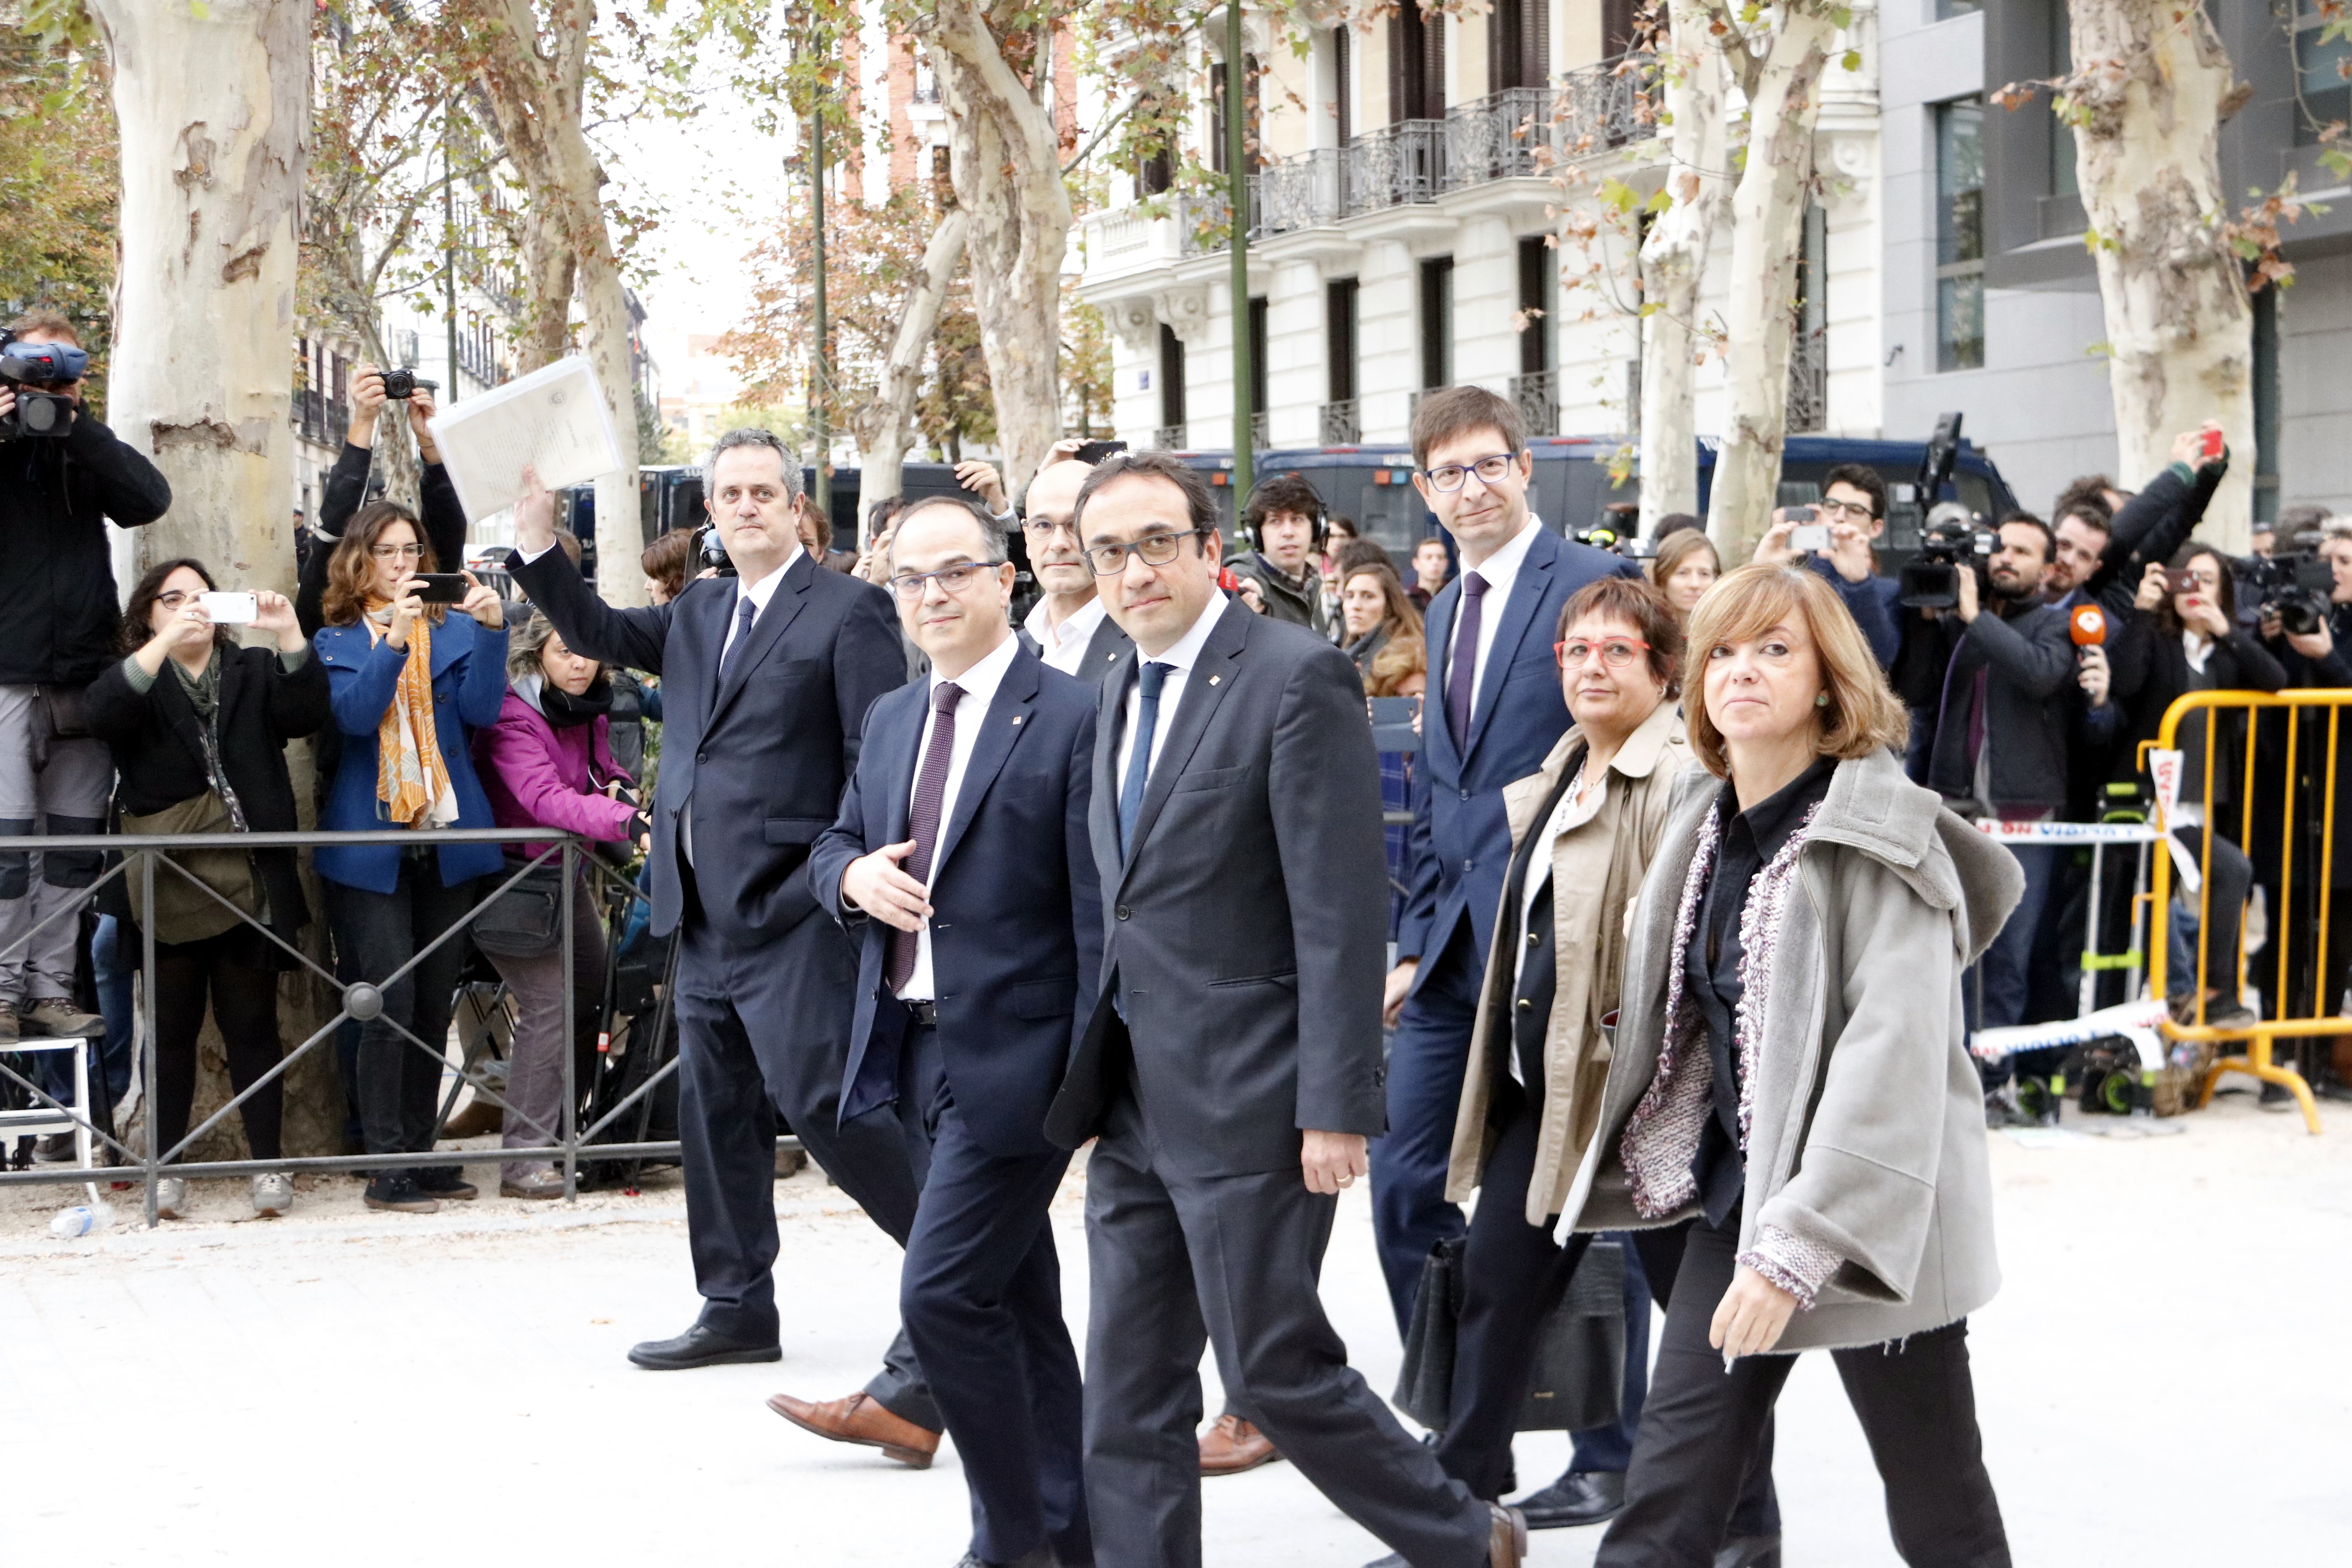 Deposed Catalan ministers Rull, Mundó, Romeva, Turull, Bassa, Forn and Borràs arrive at the Spanish National Court (by ACN)